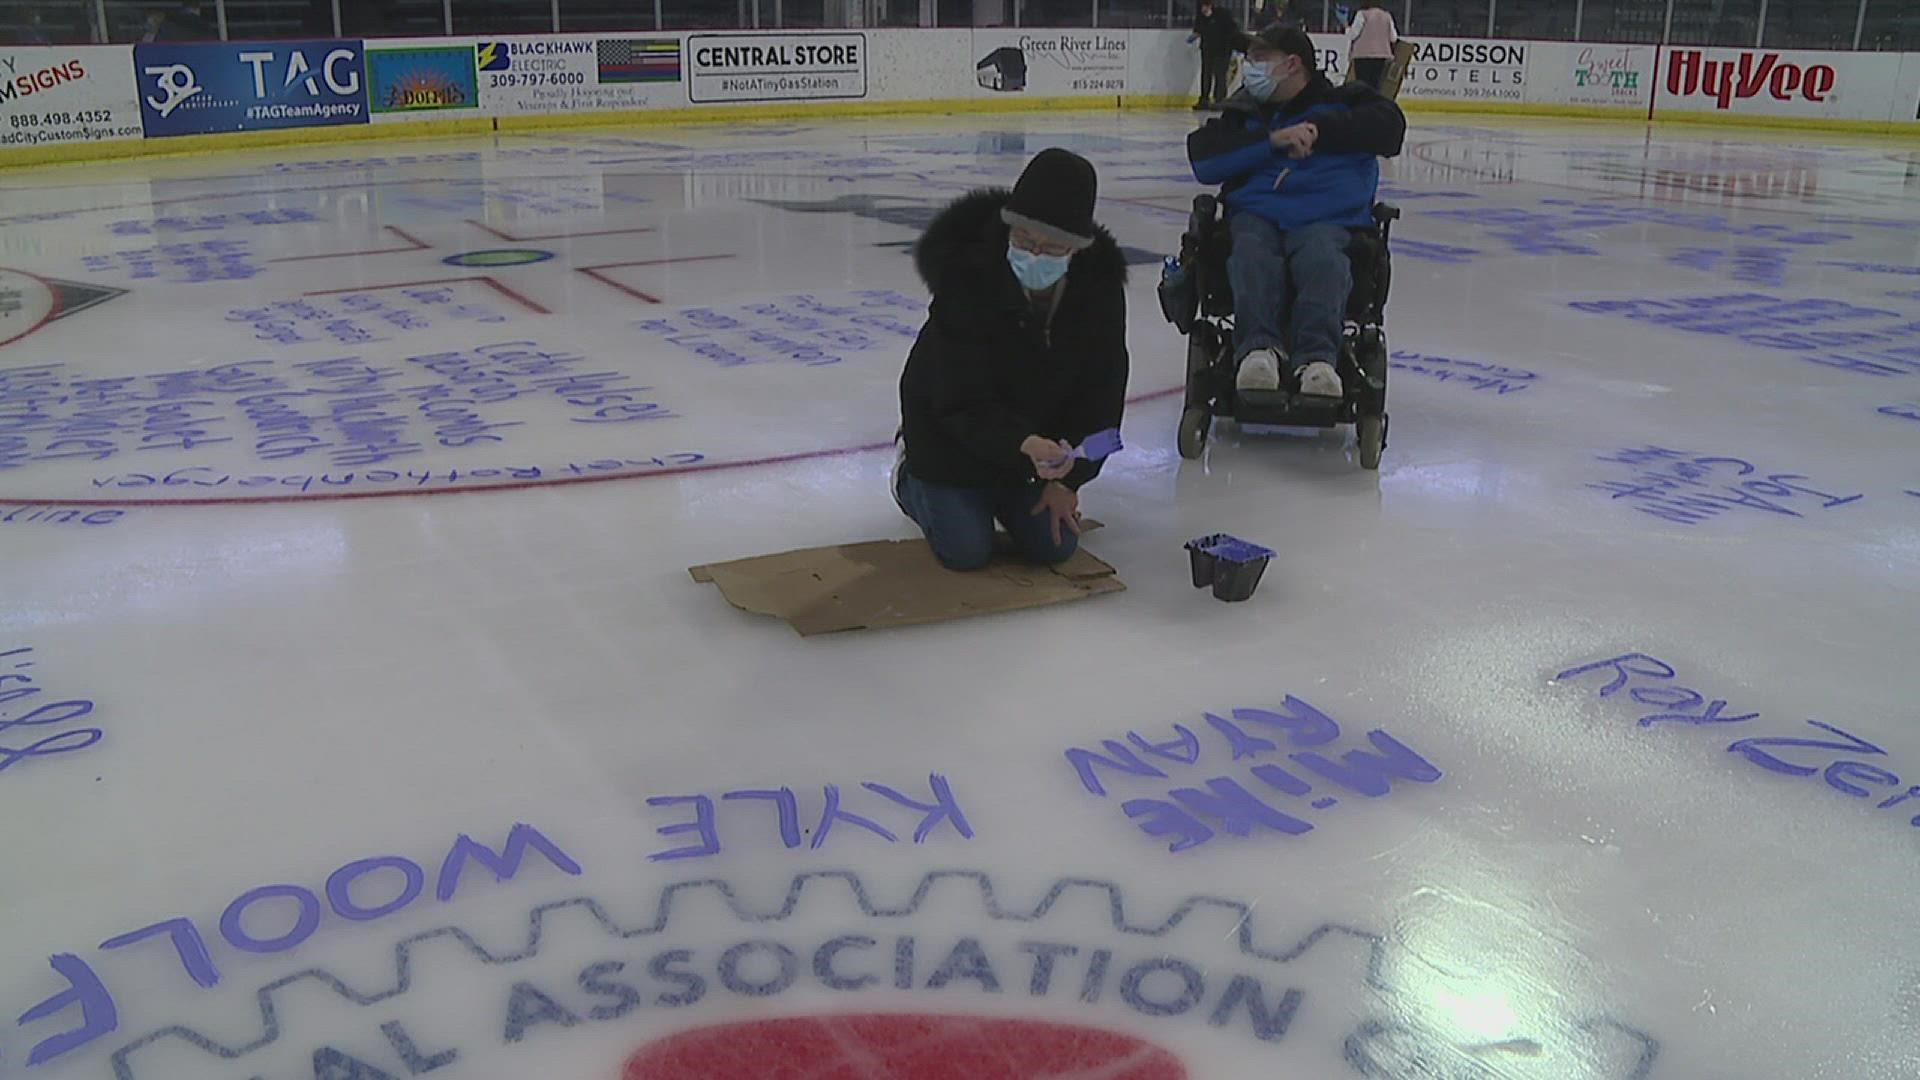 Ahead of "Hockey Fights Cancer" night, the QC Storm and UnityPoint Health Trinity invited people to paint the ice with names of cancer survivors and fighters.